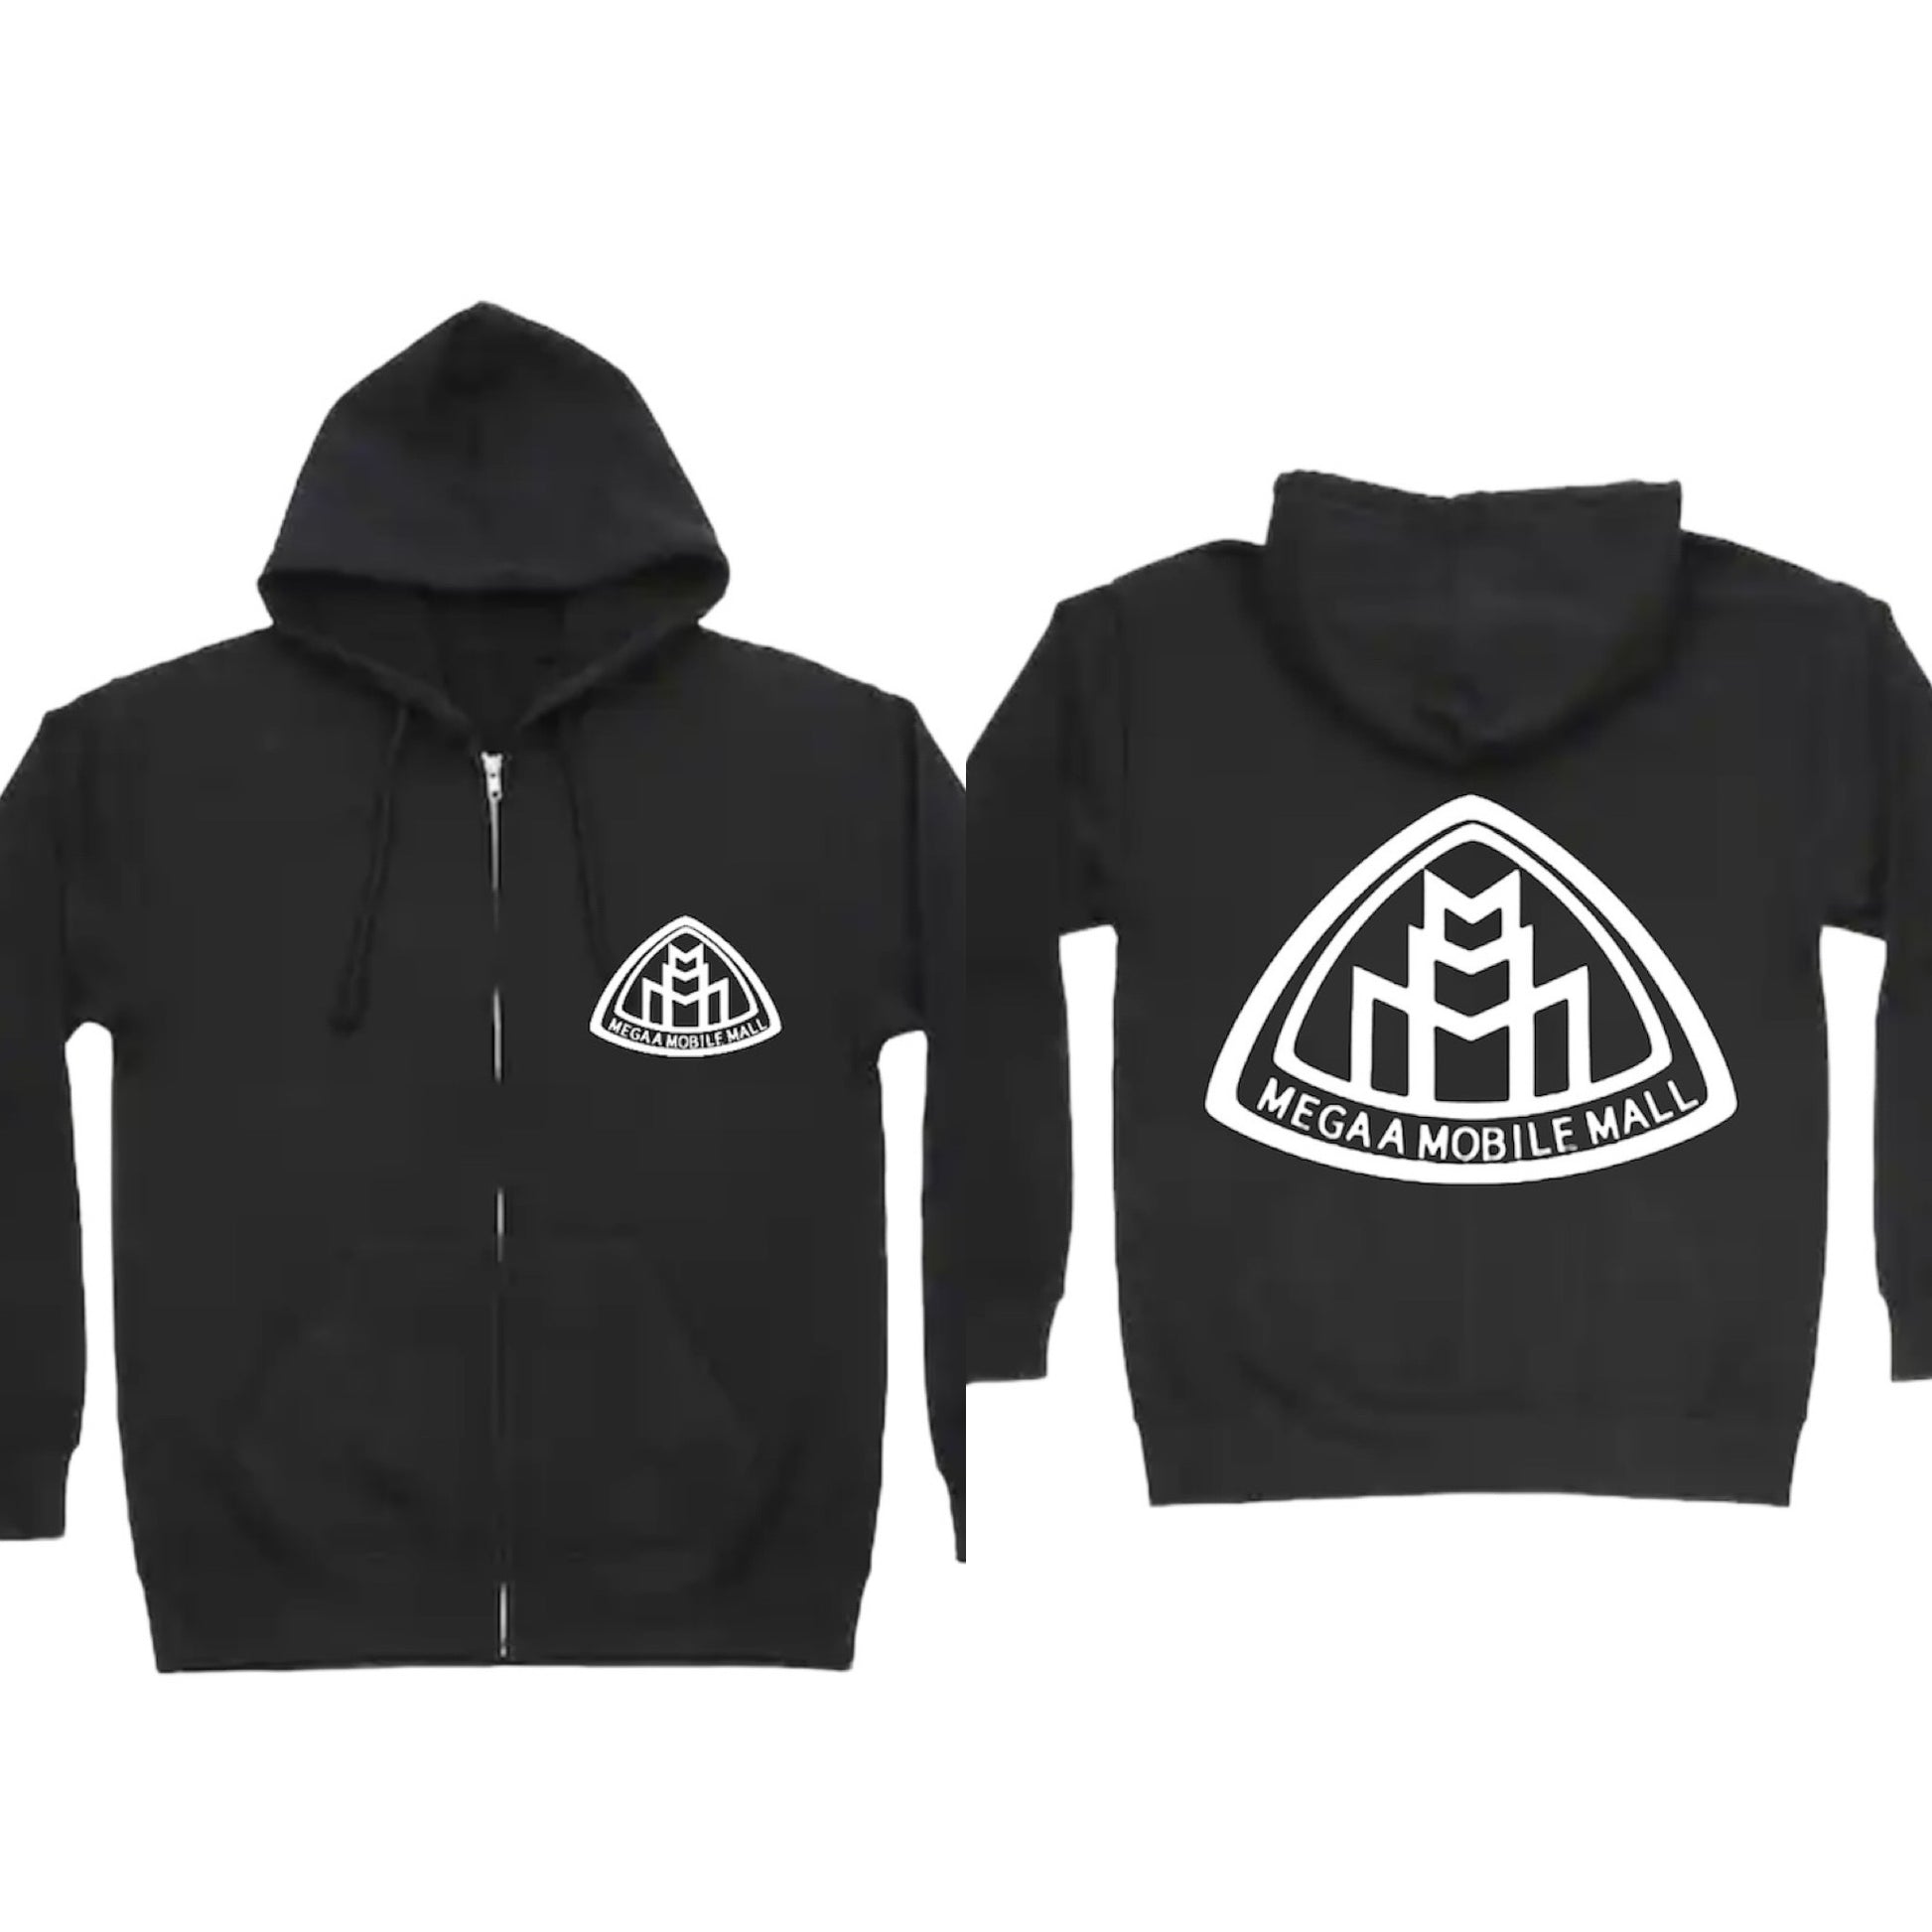 megaamobilemall black zip up hoodie with white logo color